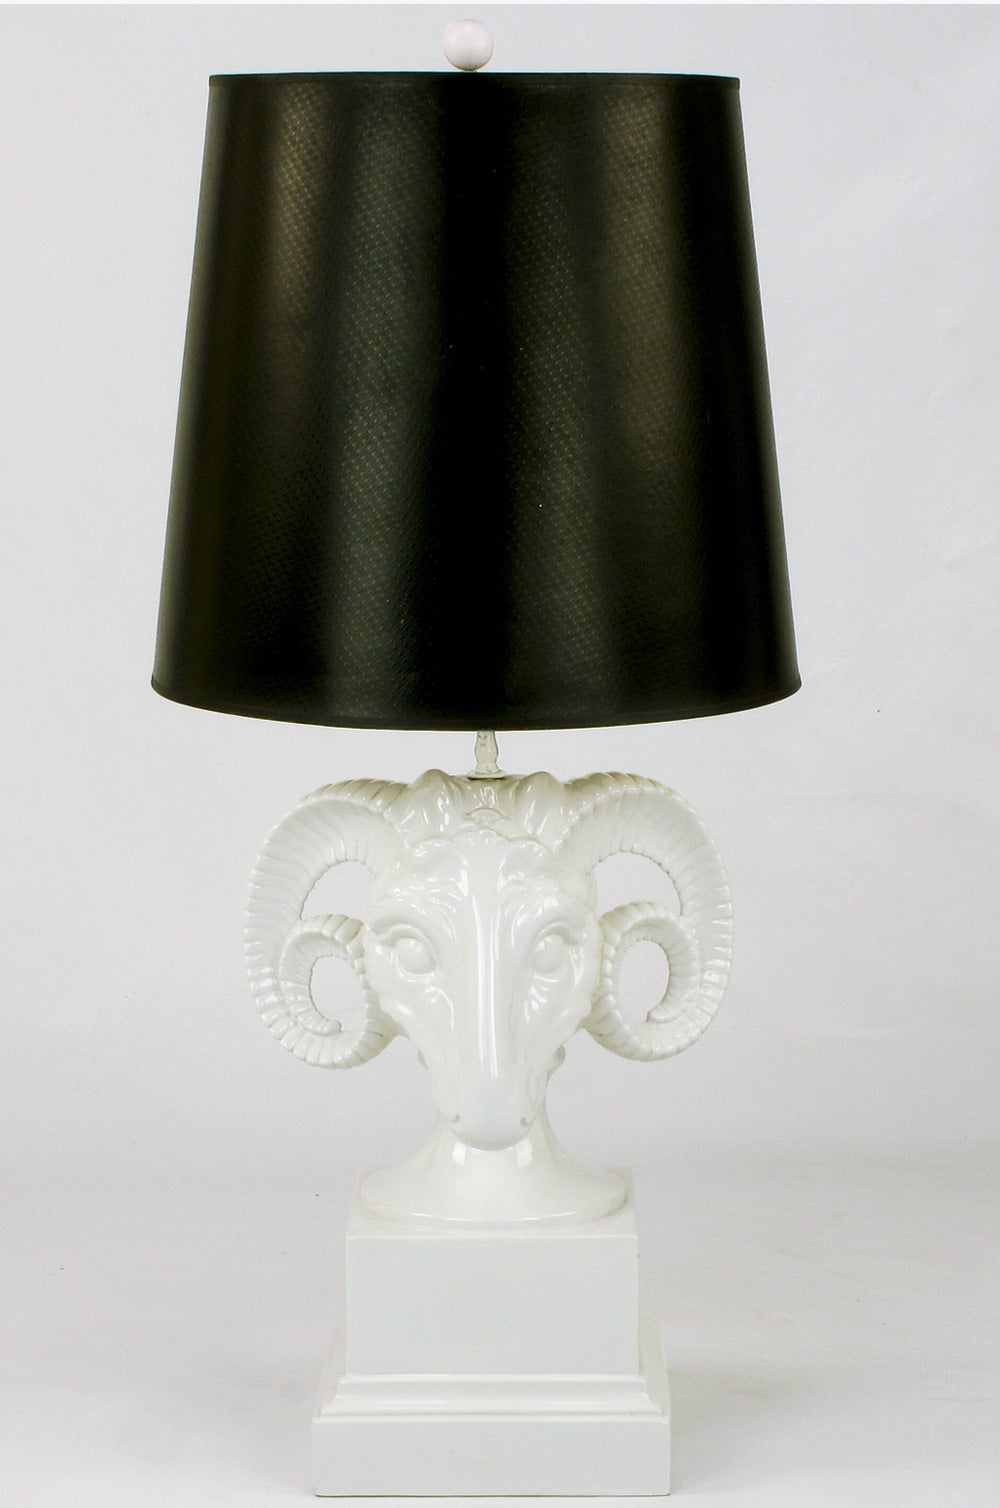 Detailed ram's head table lamp constructed of white glazed ceramic pottery. Originally sold through Chapman Manufacturing Co. Chicago IL. Sold sans shade. Rewired.